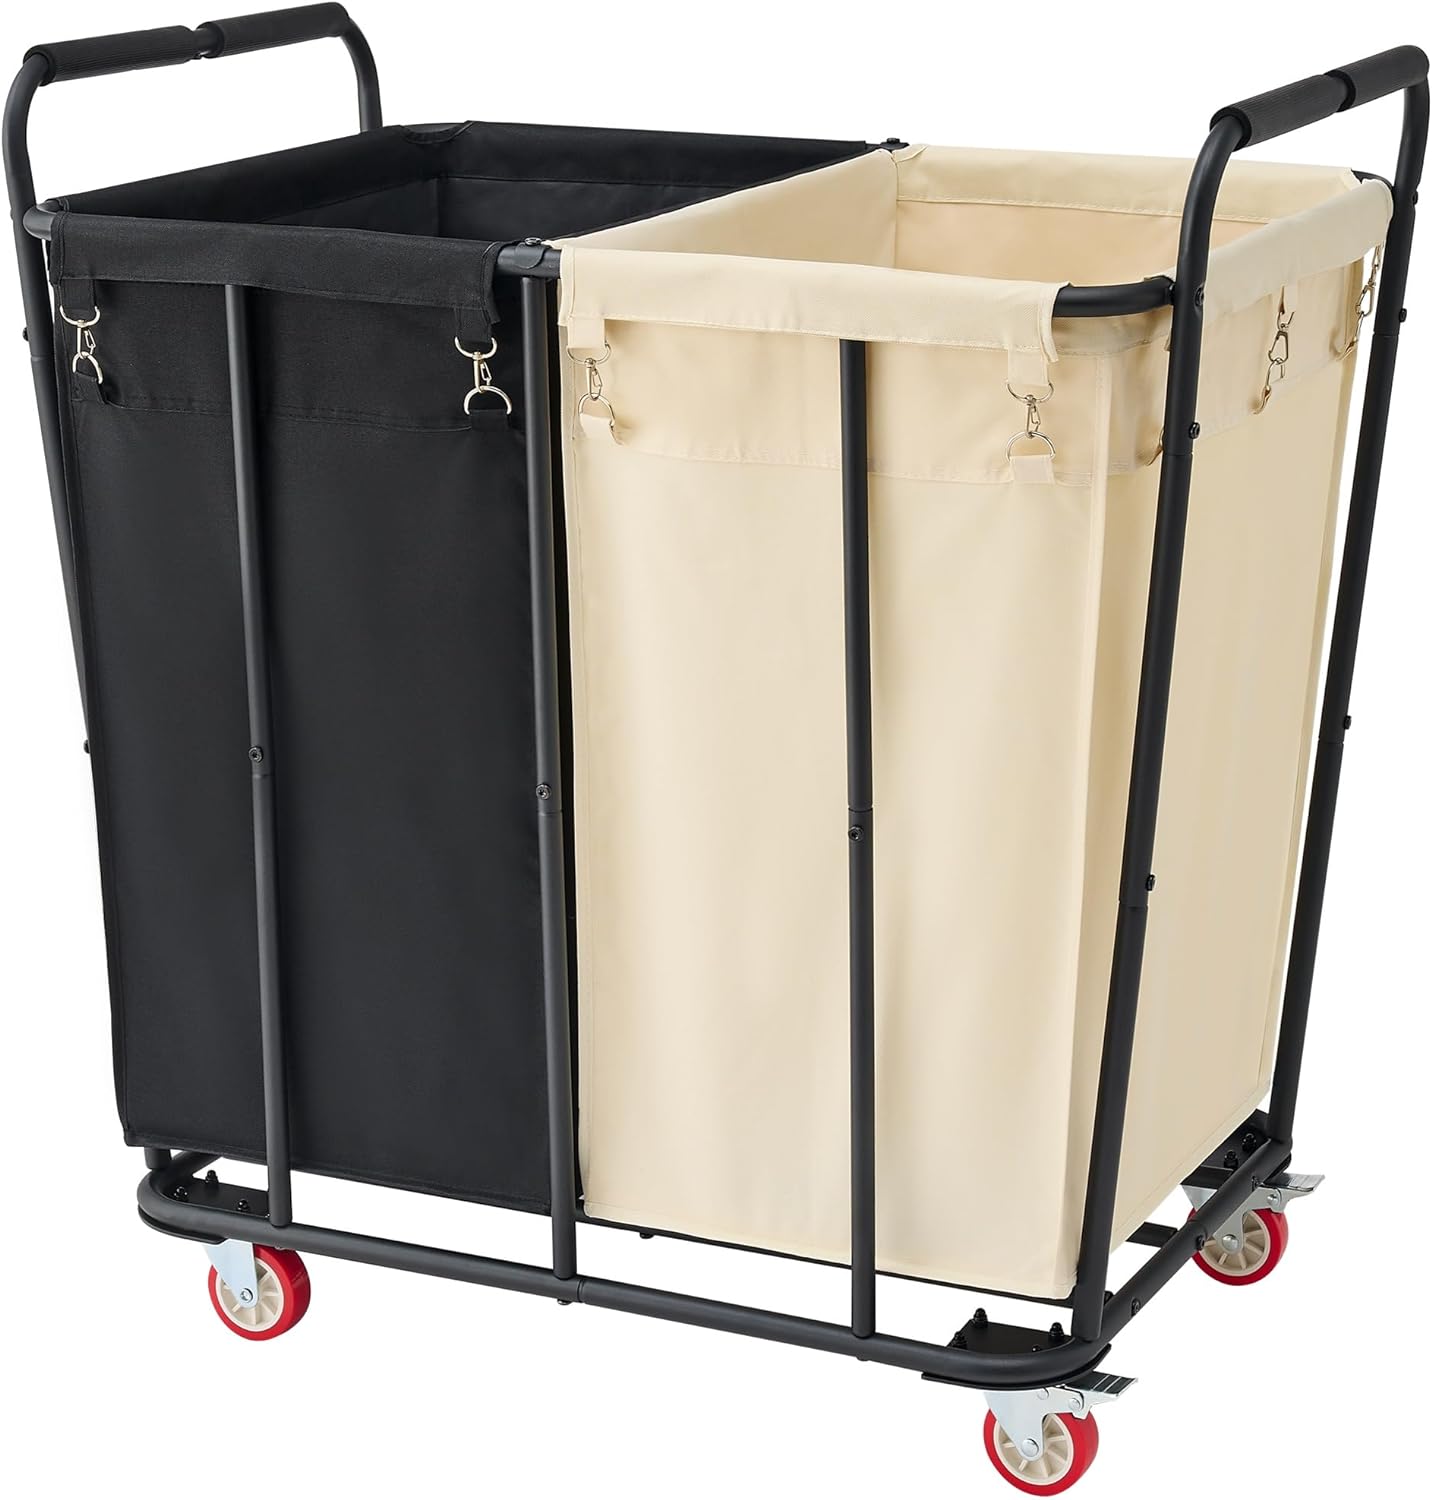 Hoctieon 2 Section Laundry Sorter Cart, Rolling Laundry Hamper with Wheels, Heavy Duty Laundry Basket Organizer, Large Laundry Separator Hamper with Removable Bags, Black&Beige